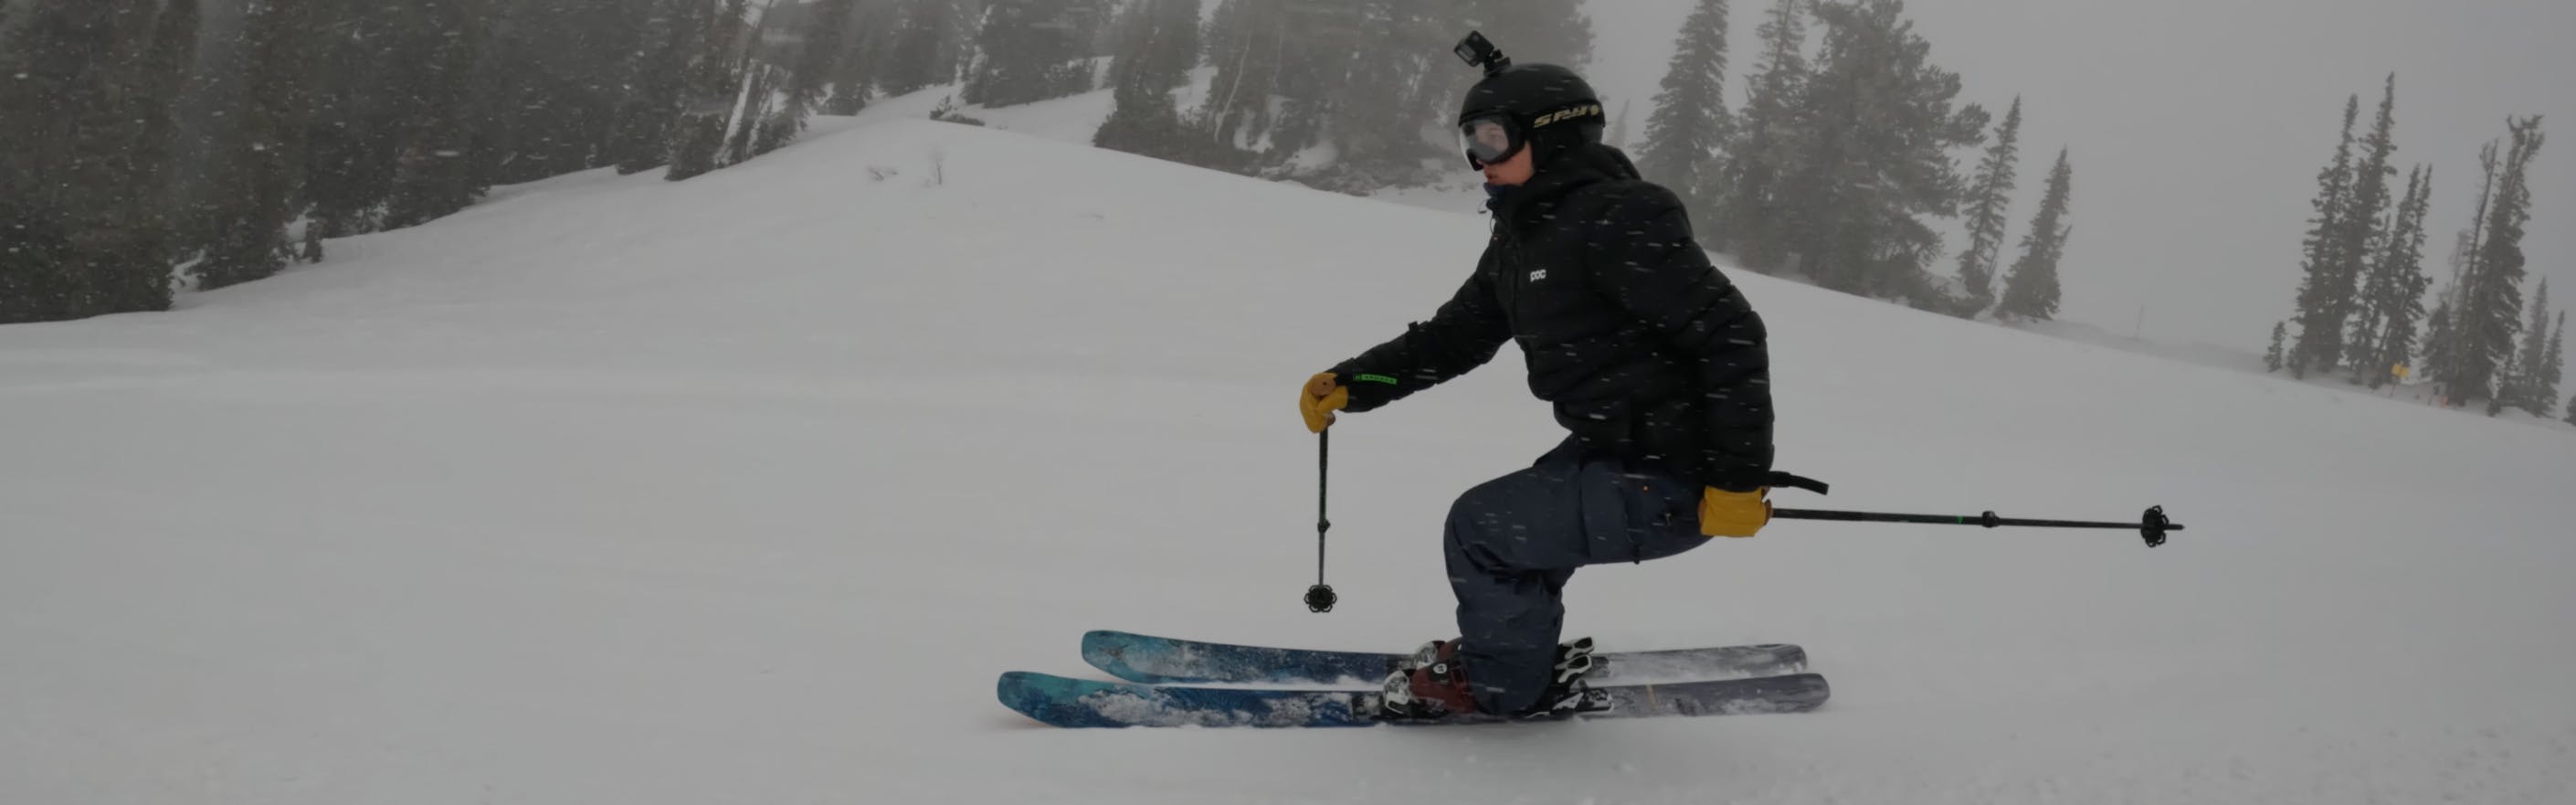 Curated Ski Expert Daryl Morrison on the 2023 Atomic Bent Chetler 100 skis on a groomed run in foggy conditions